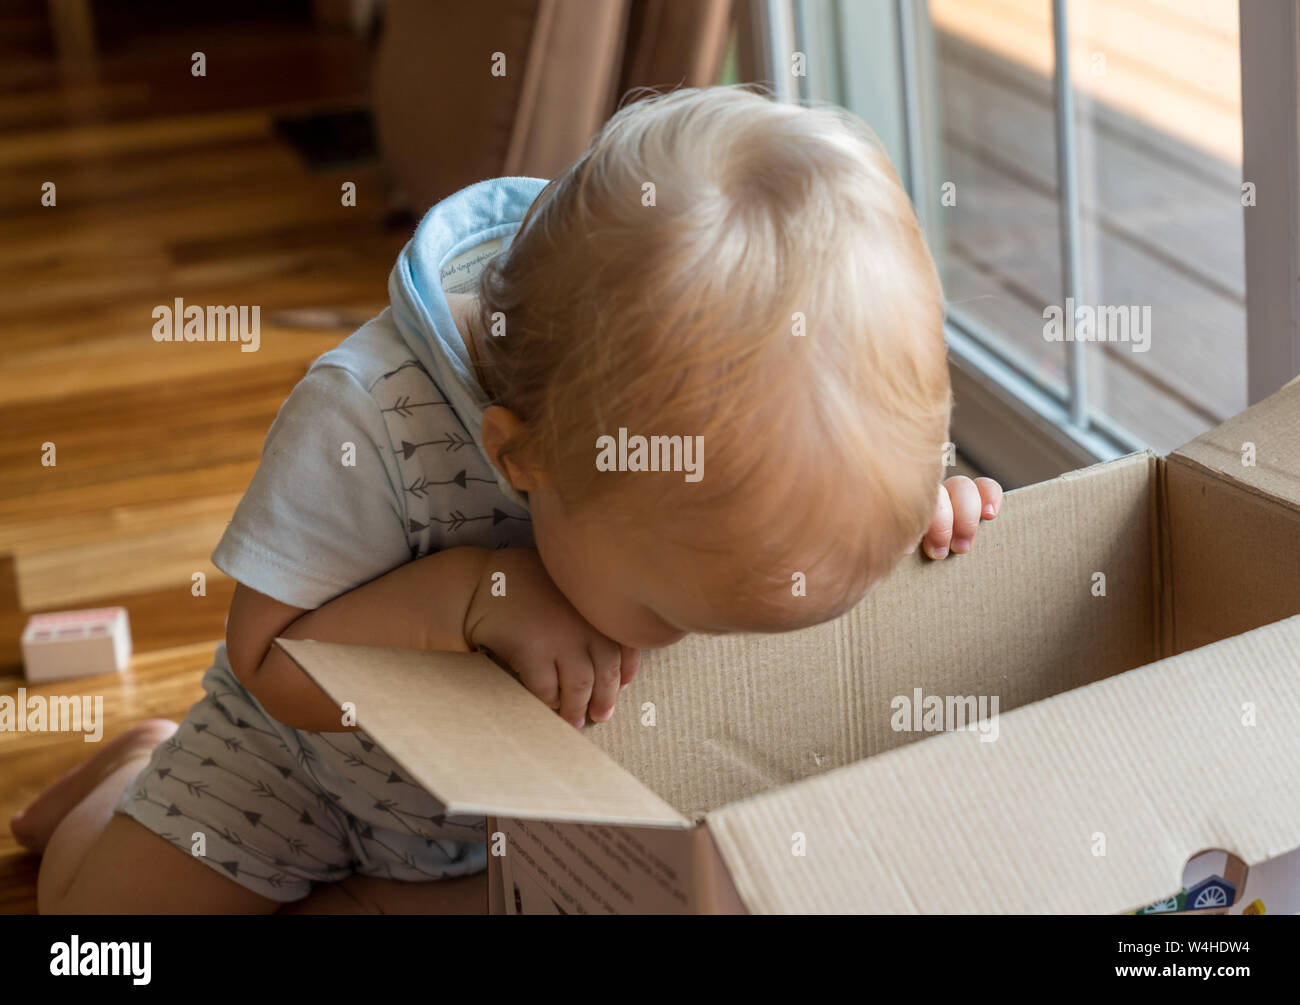 Young baby boy investigating a cardboard box and looking inside Stock Photo